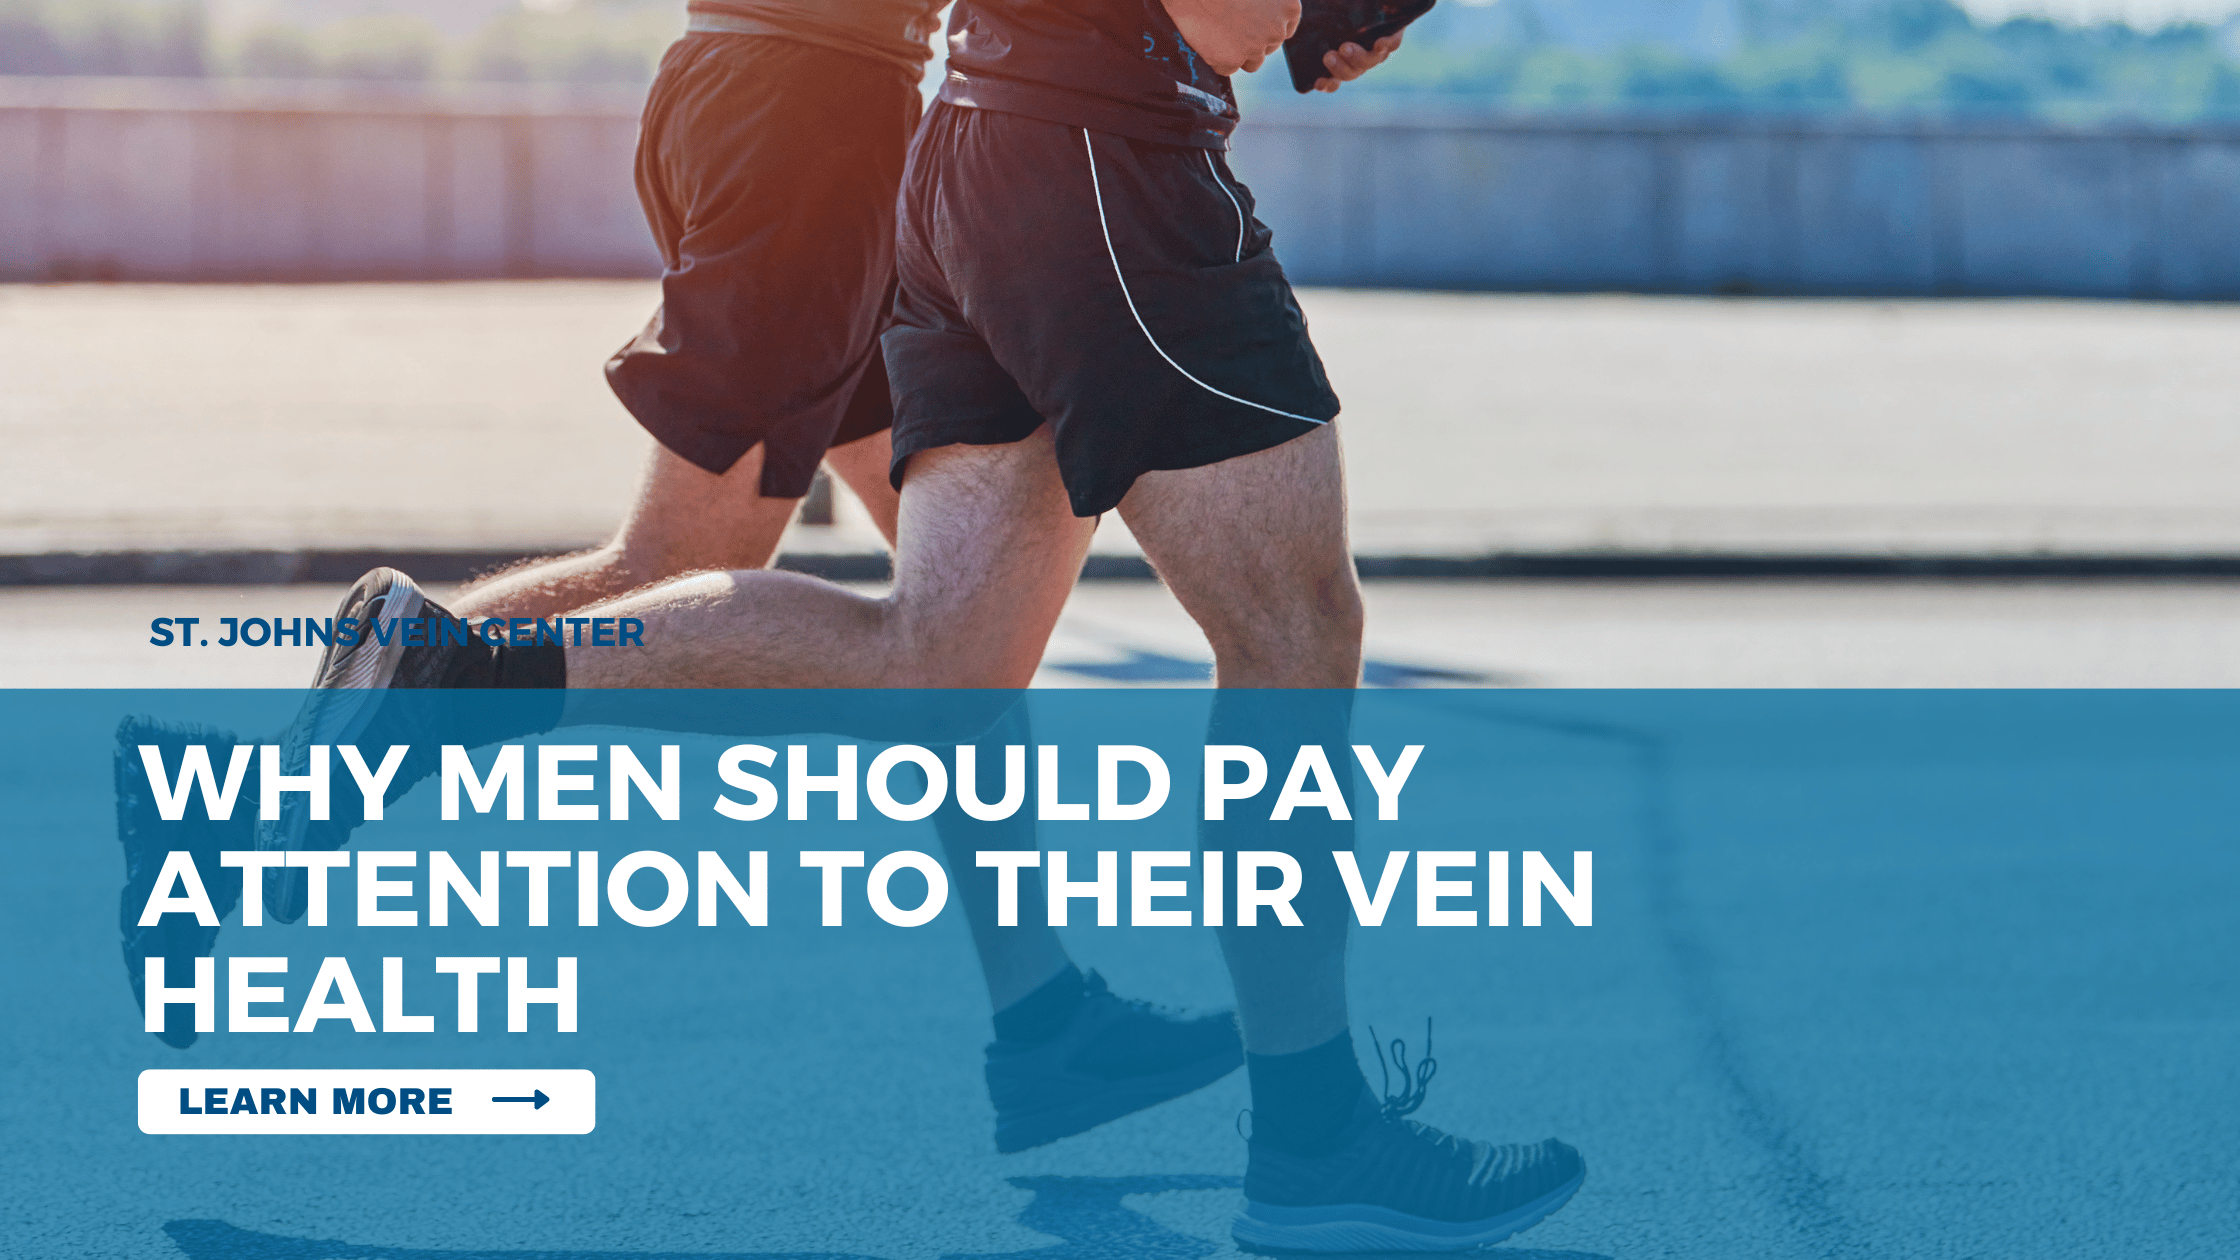 Why Men Should Pay Attention to Their Vein Health